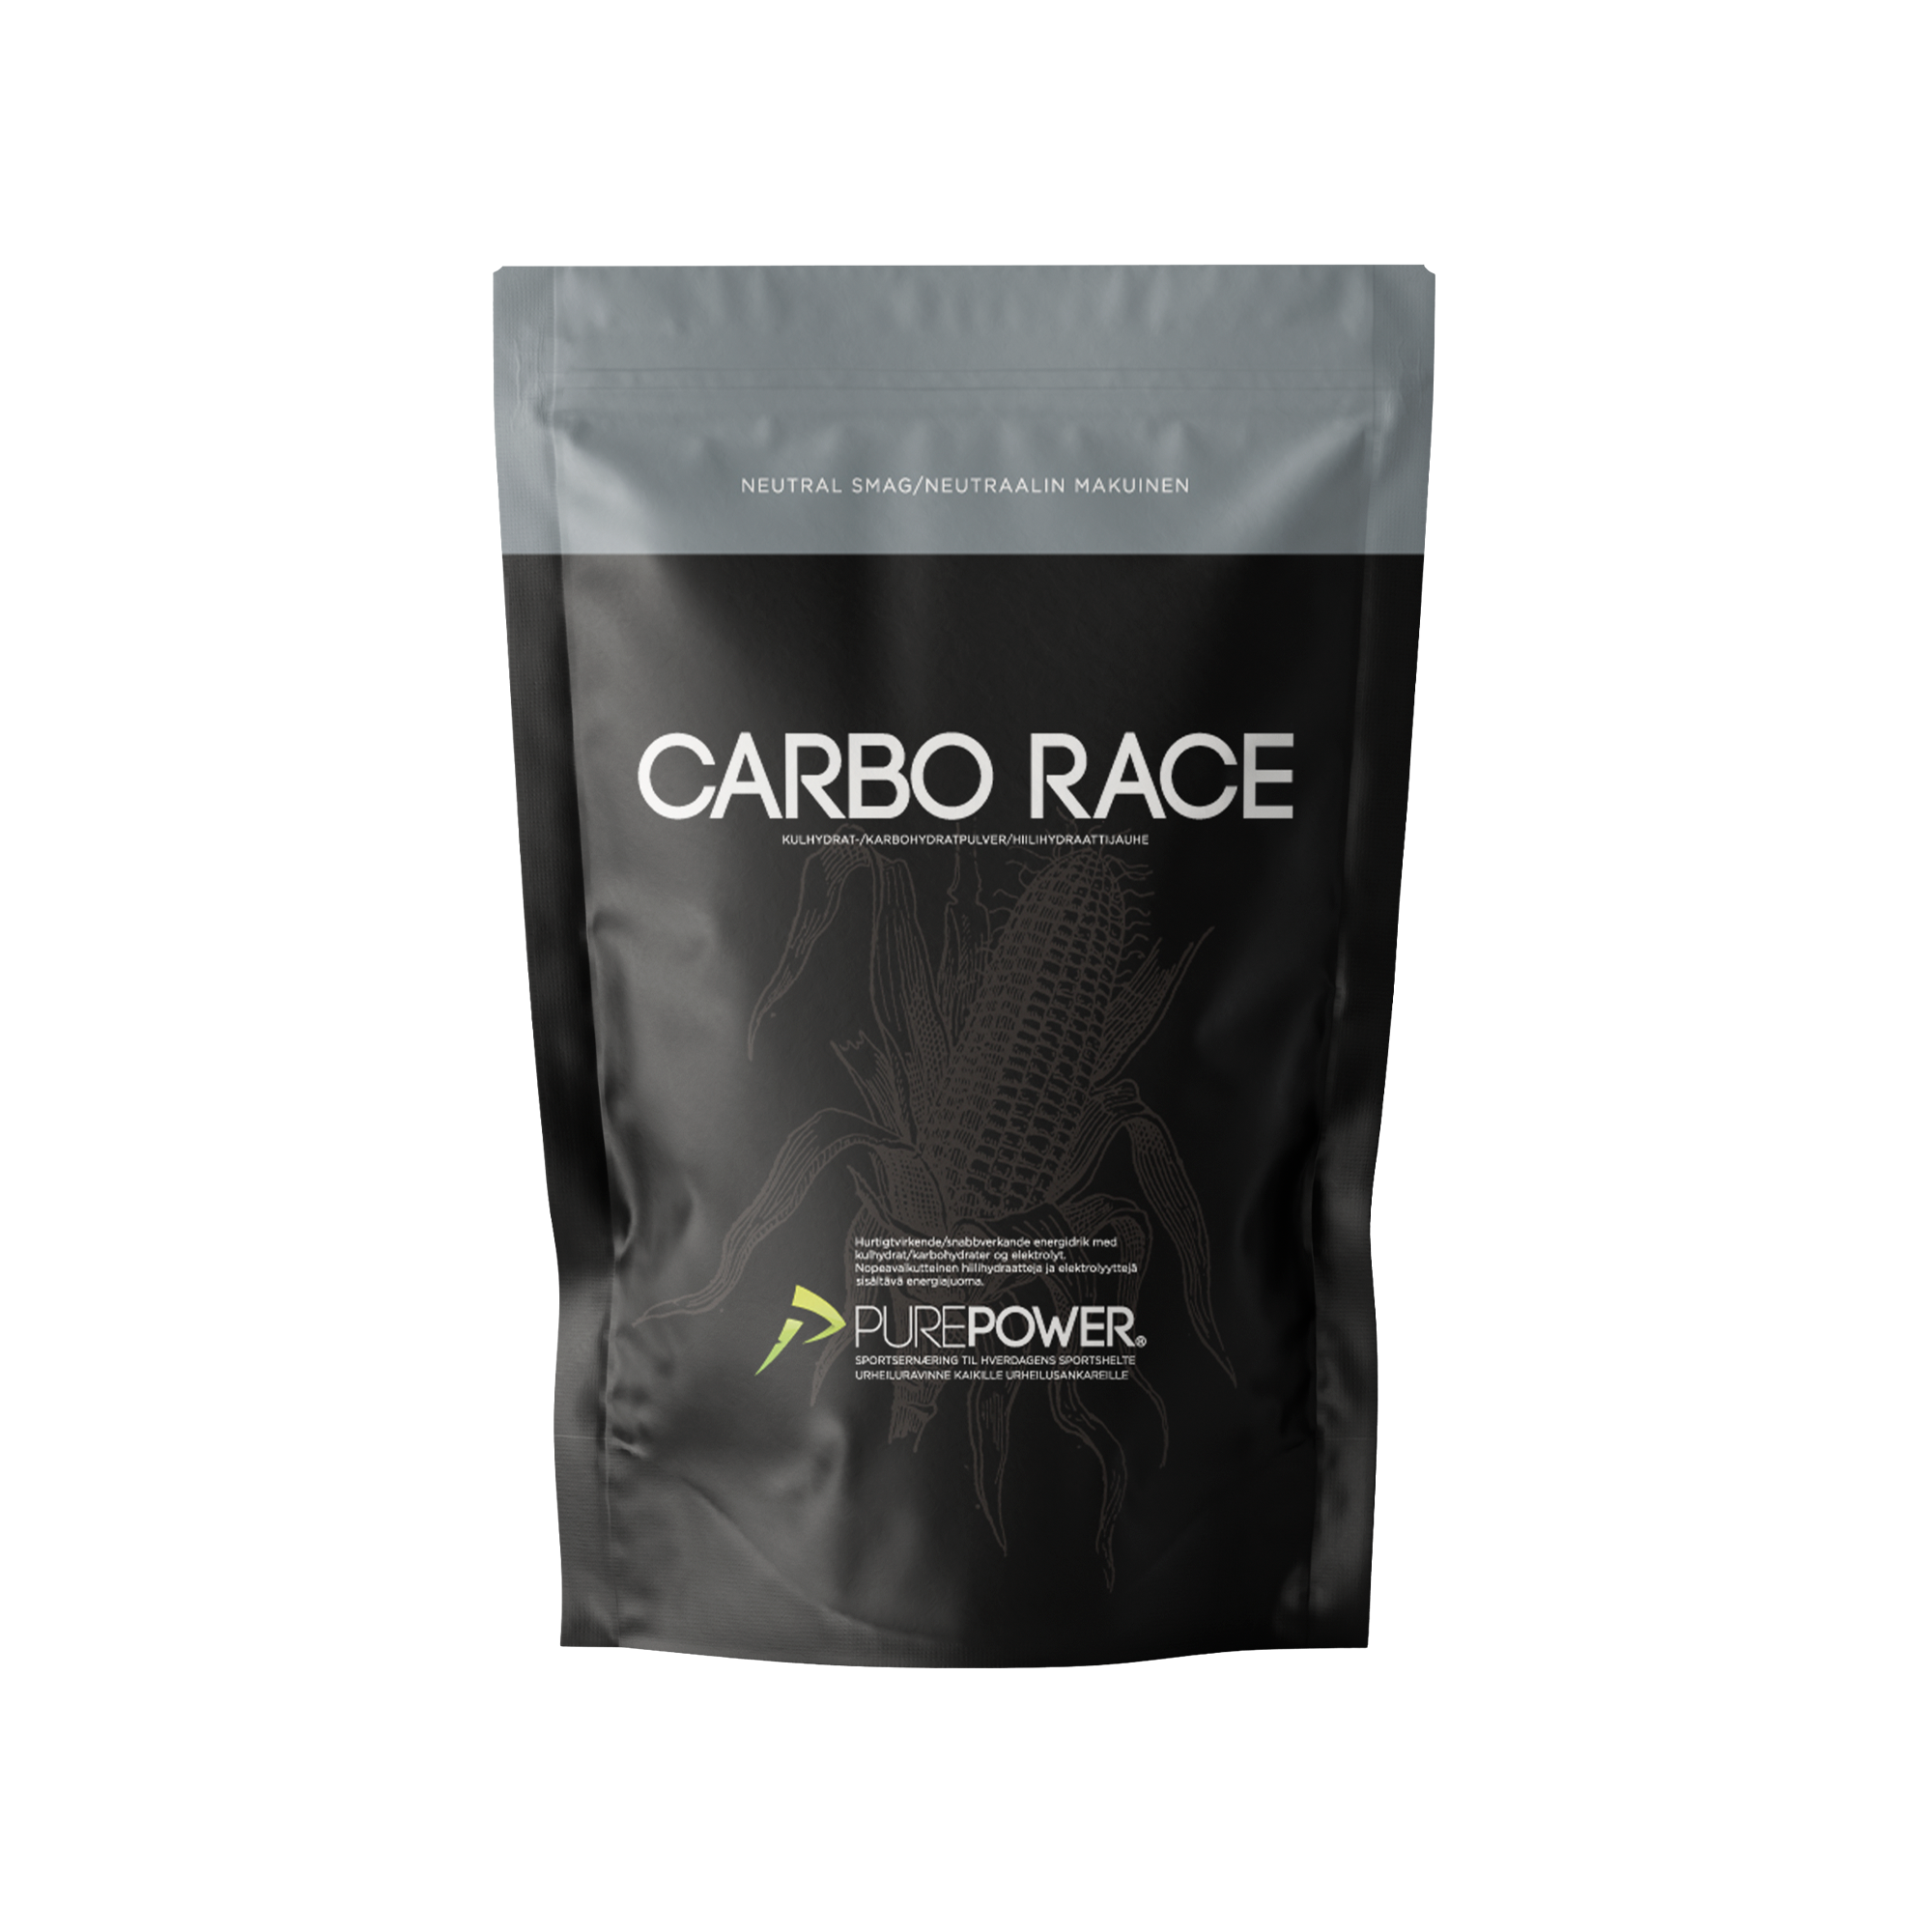 PurePower Carbo Race Neutral 500 g